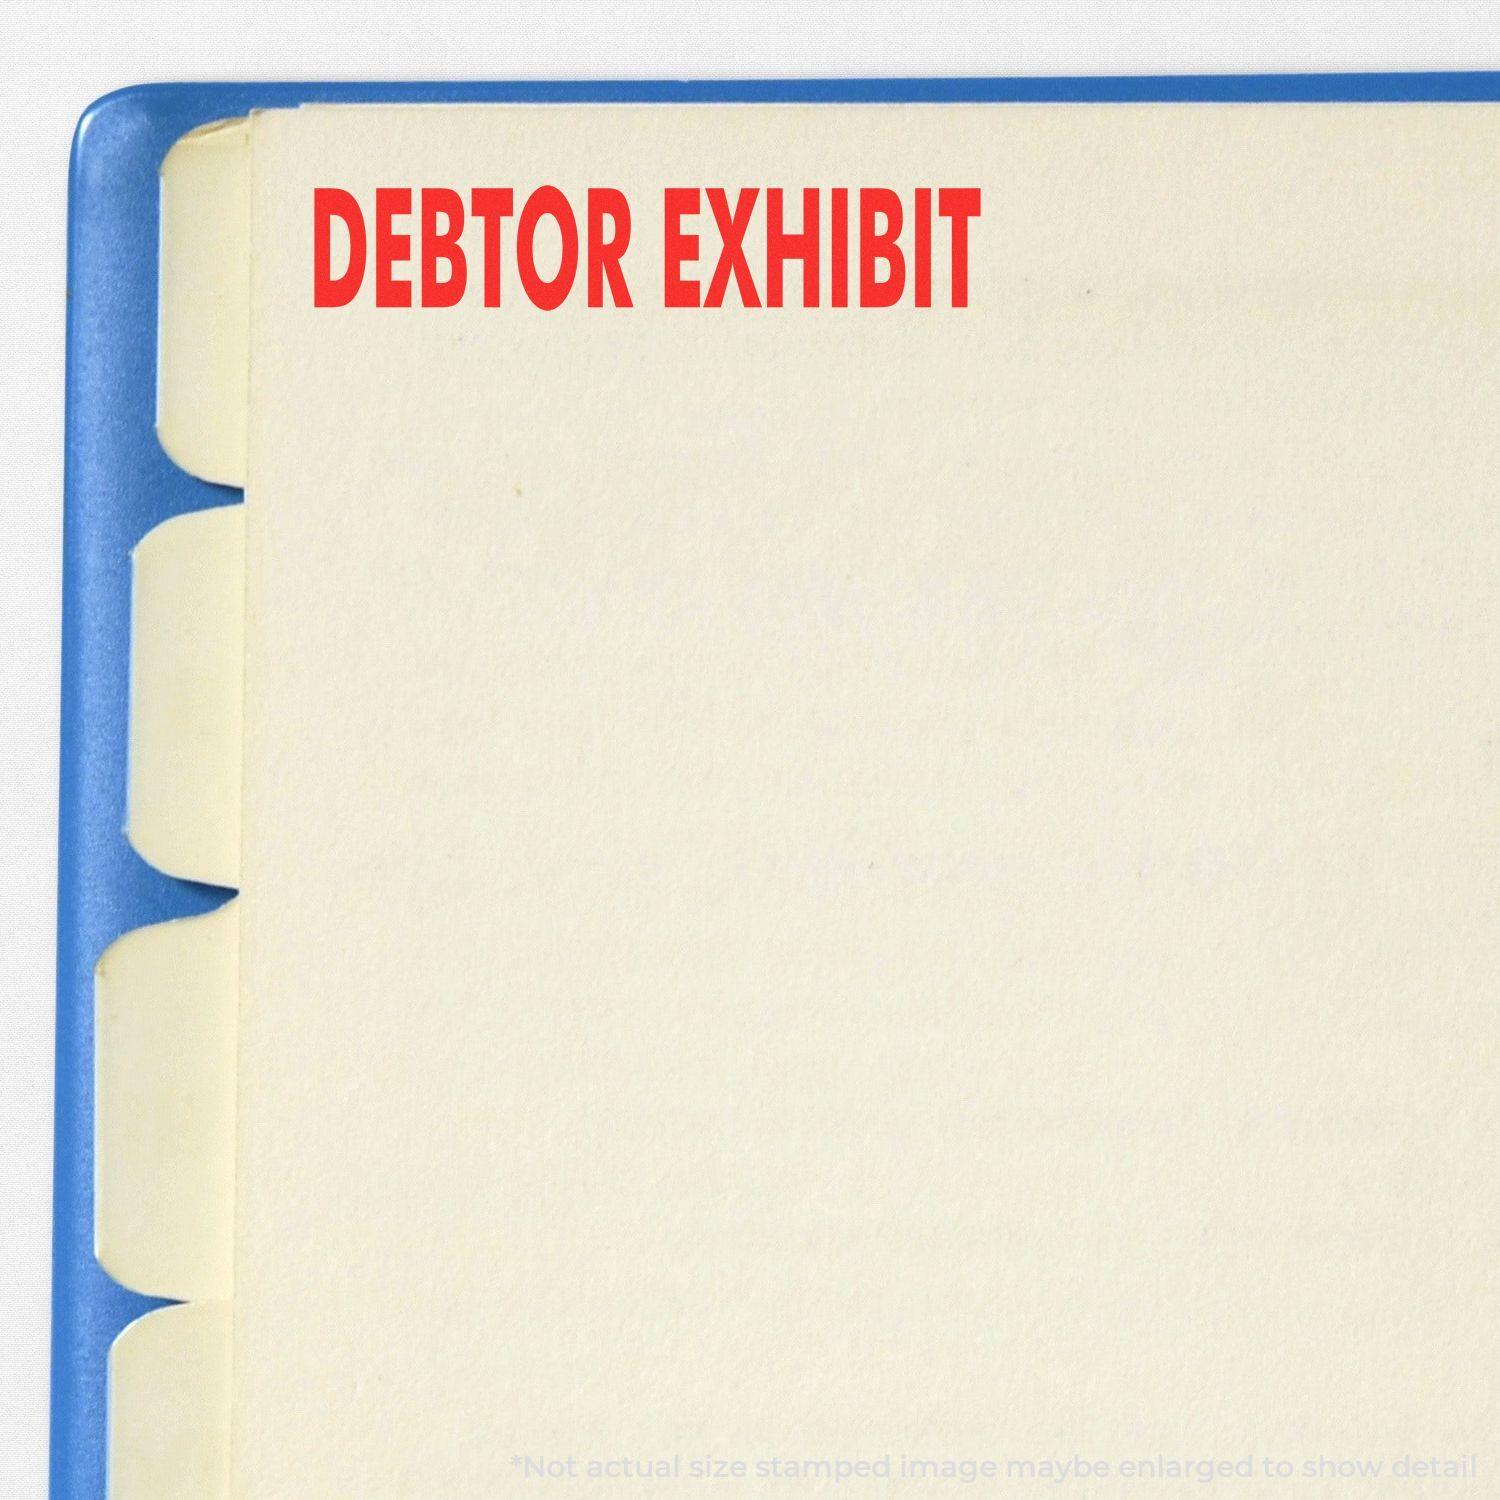 A self-inking stamp with a stamped image showing how the text "DEBTOR EXHIBIT" in a large bold font is displayed by it.